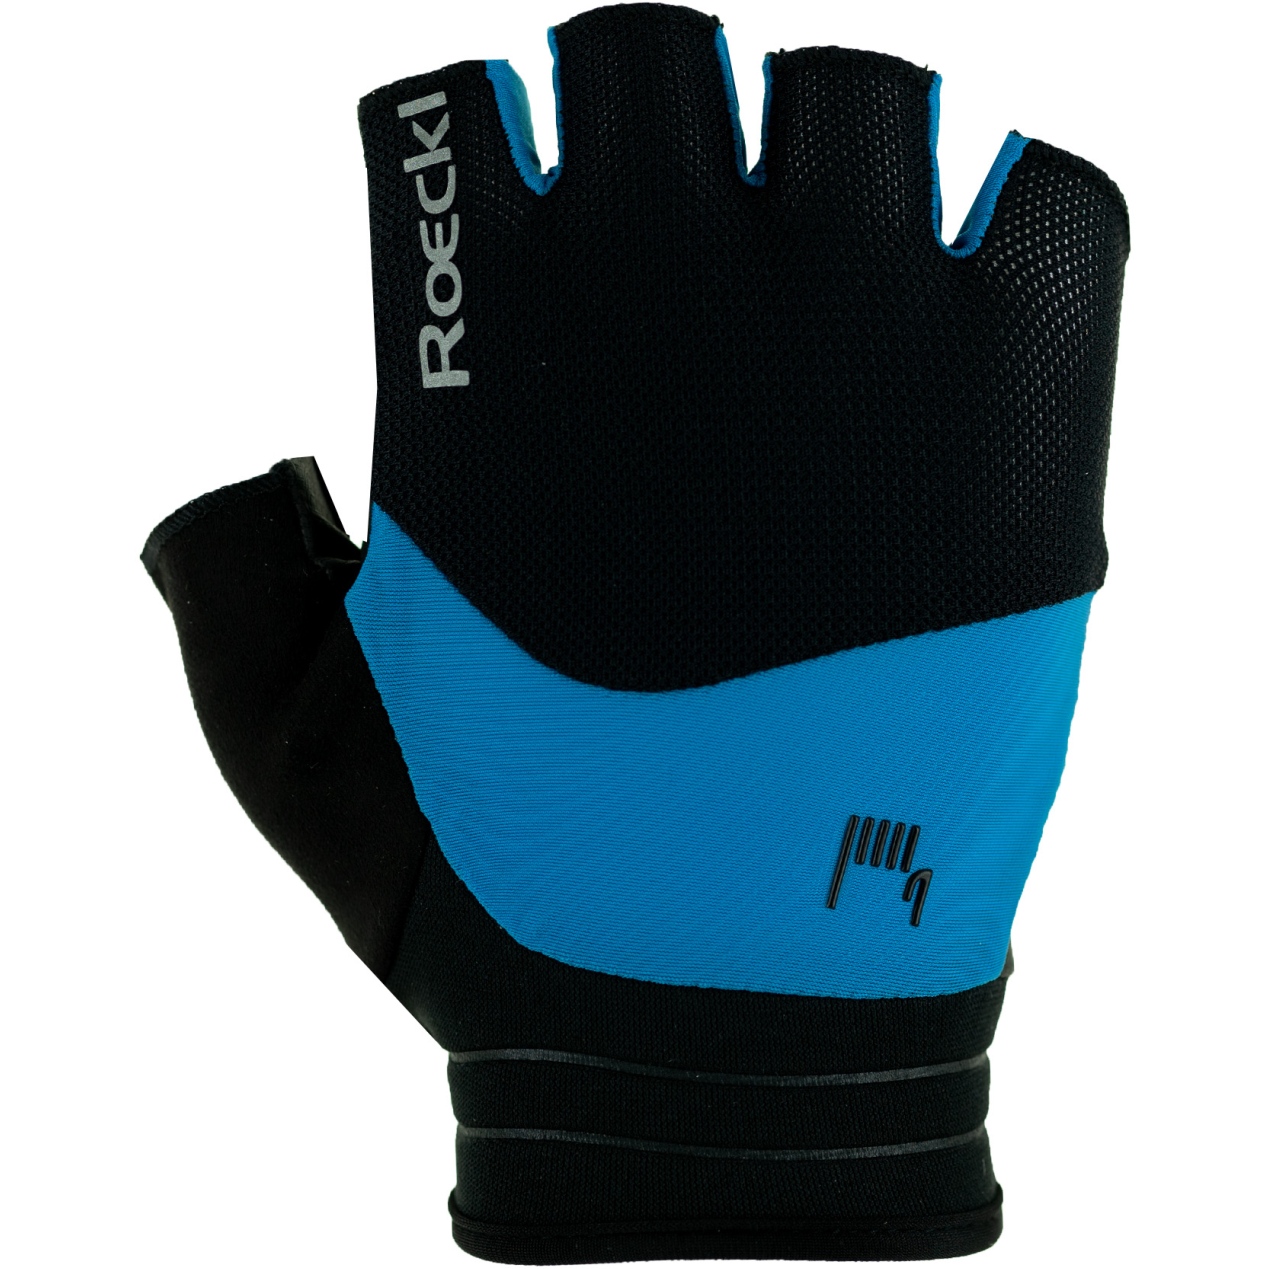 Picture of Roeckl Sports Bonau Cycling Gloves - black/blue 9500